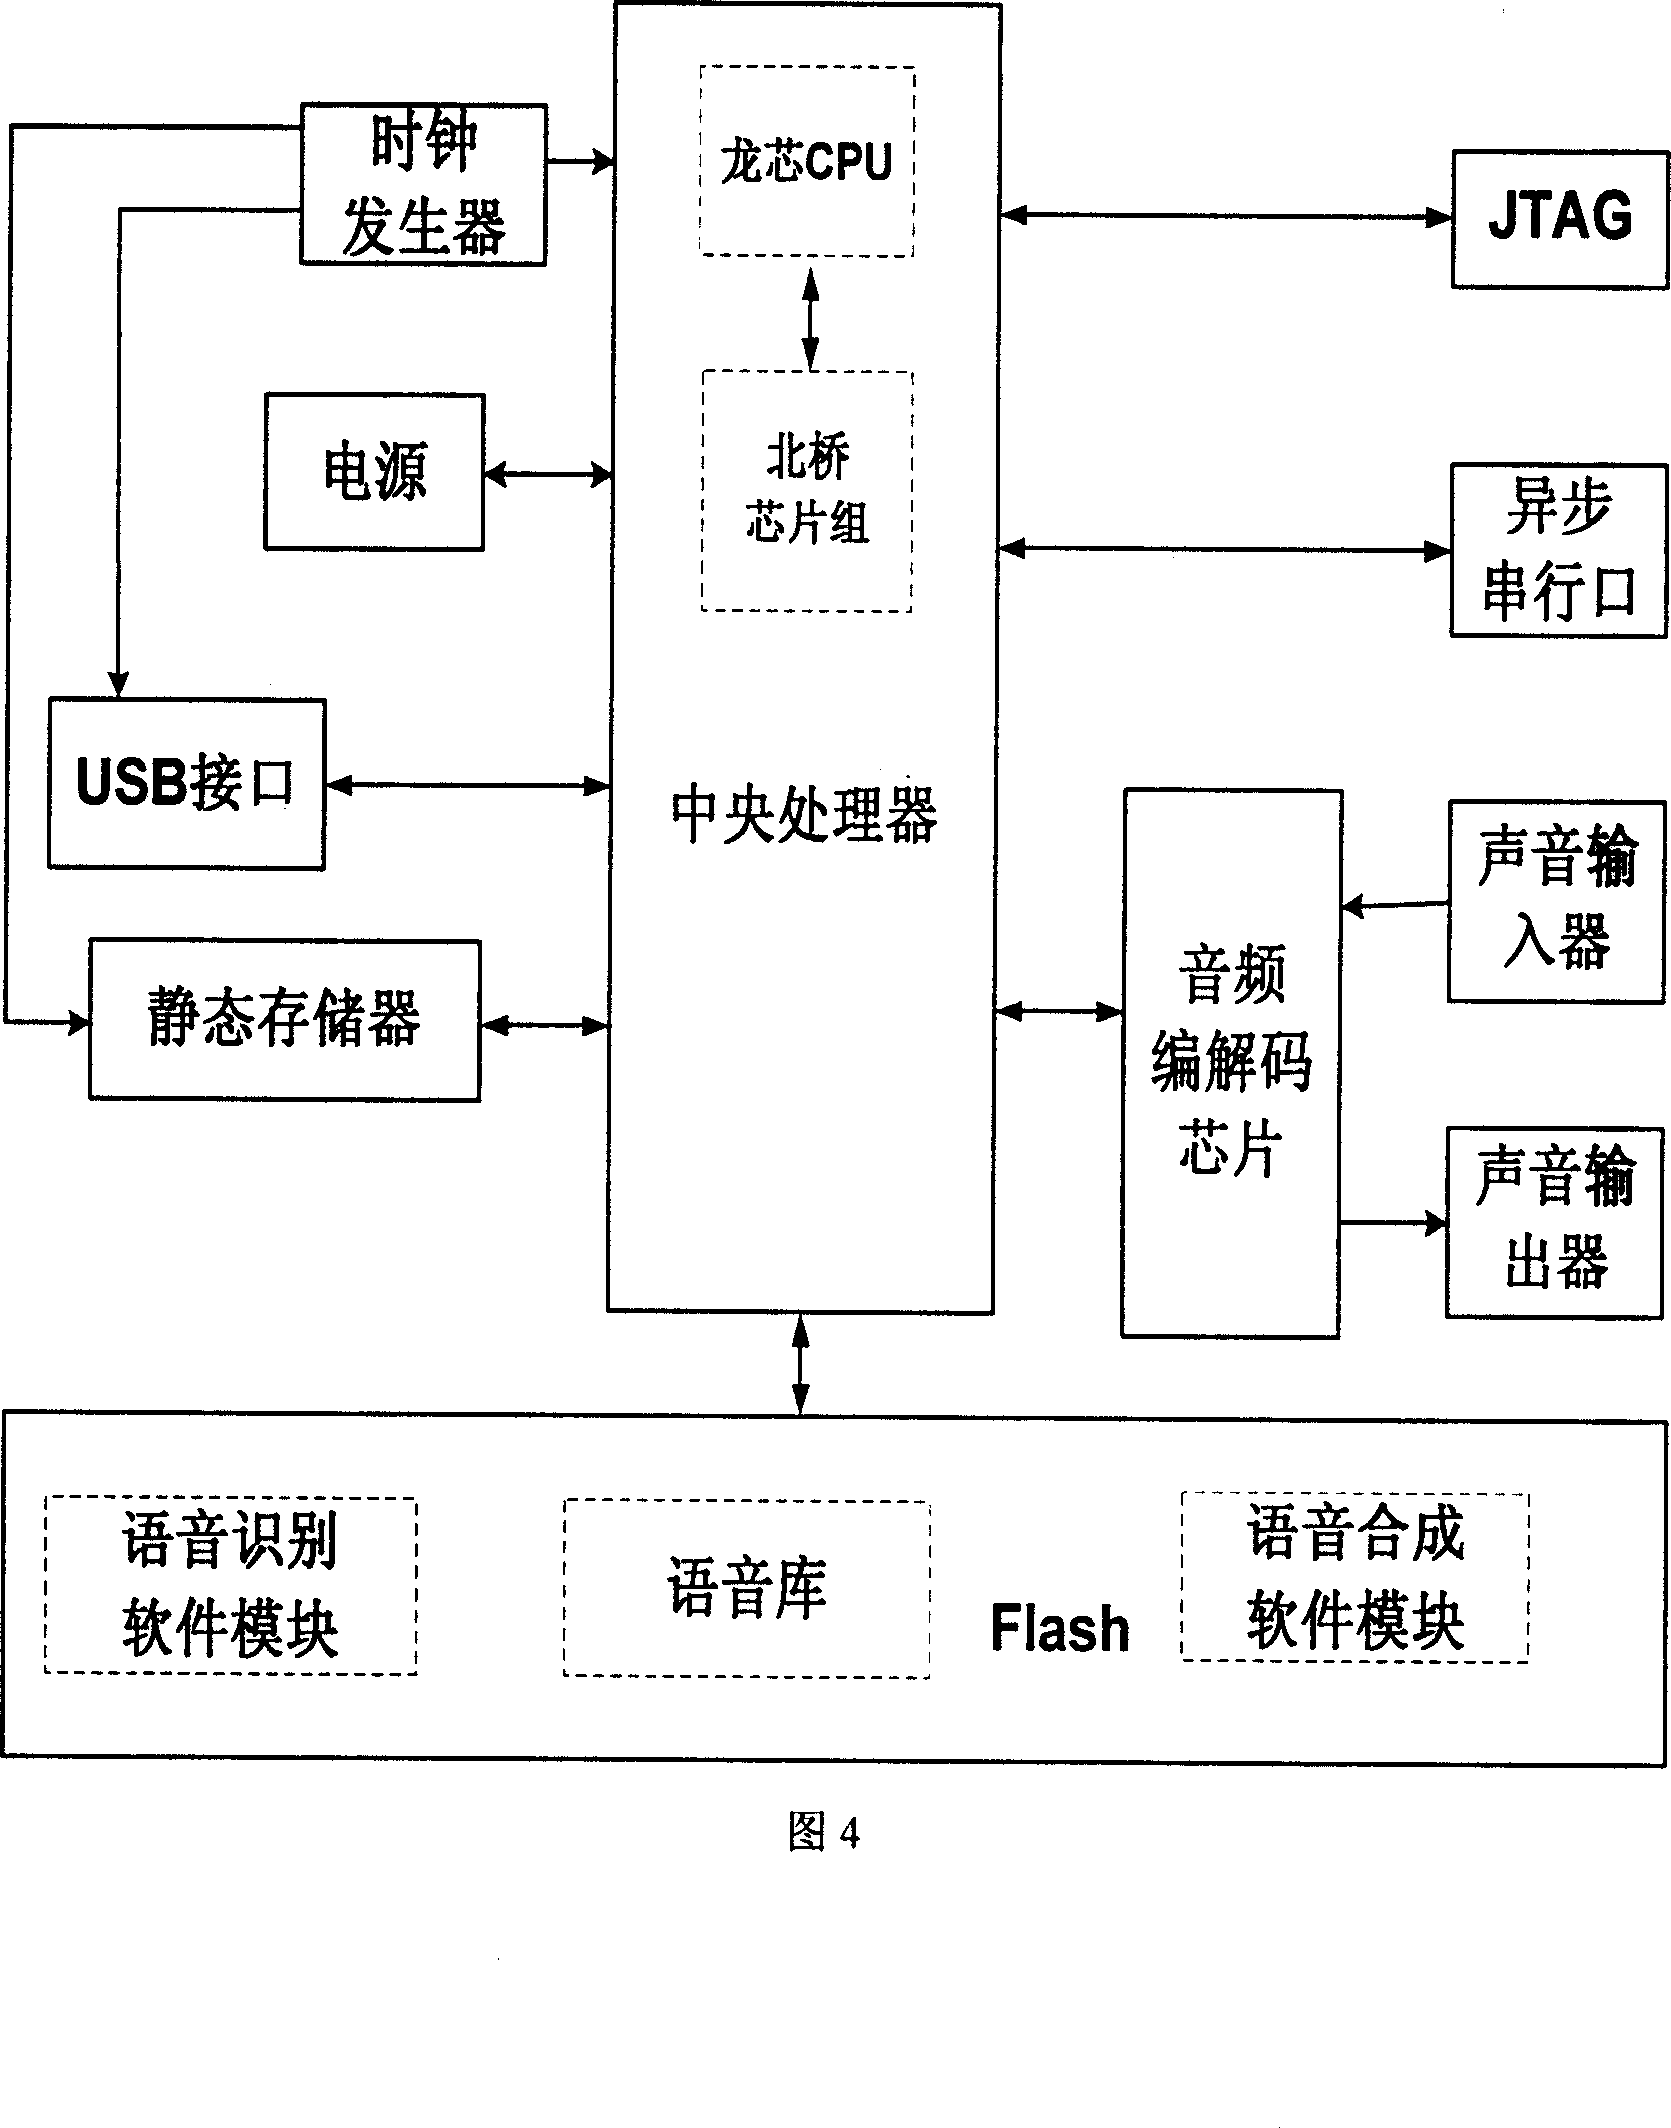 Embedded voice interaction device and interaction method thereof